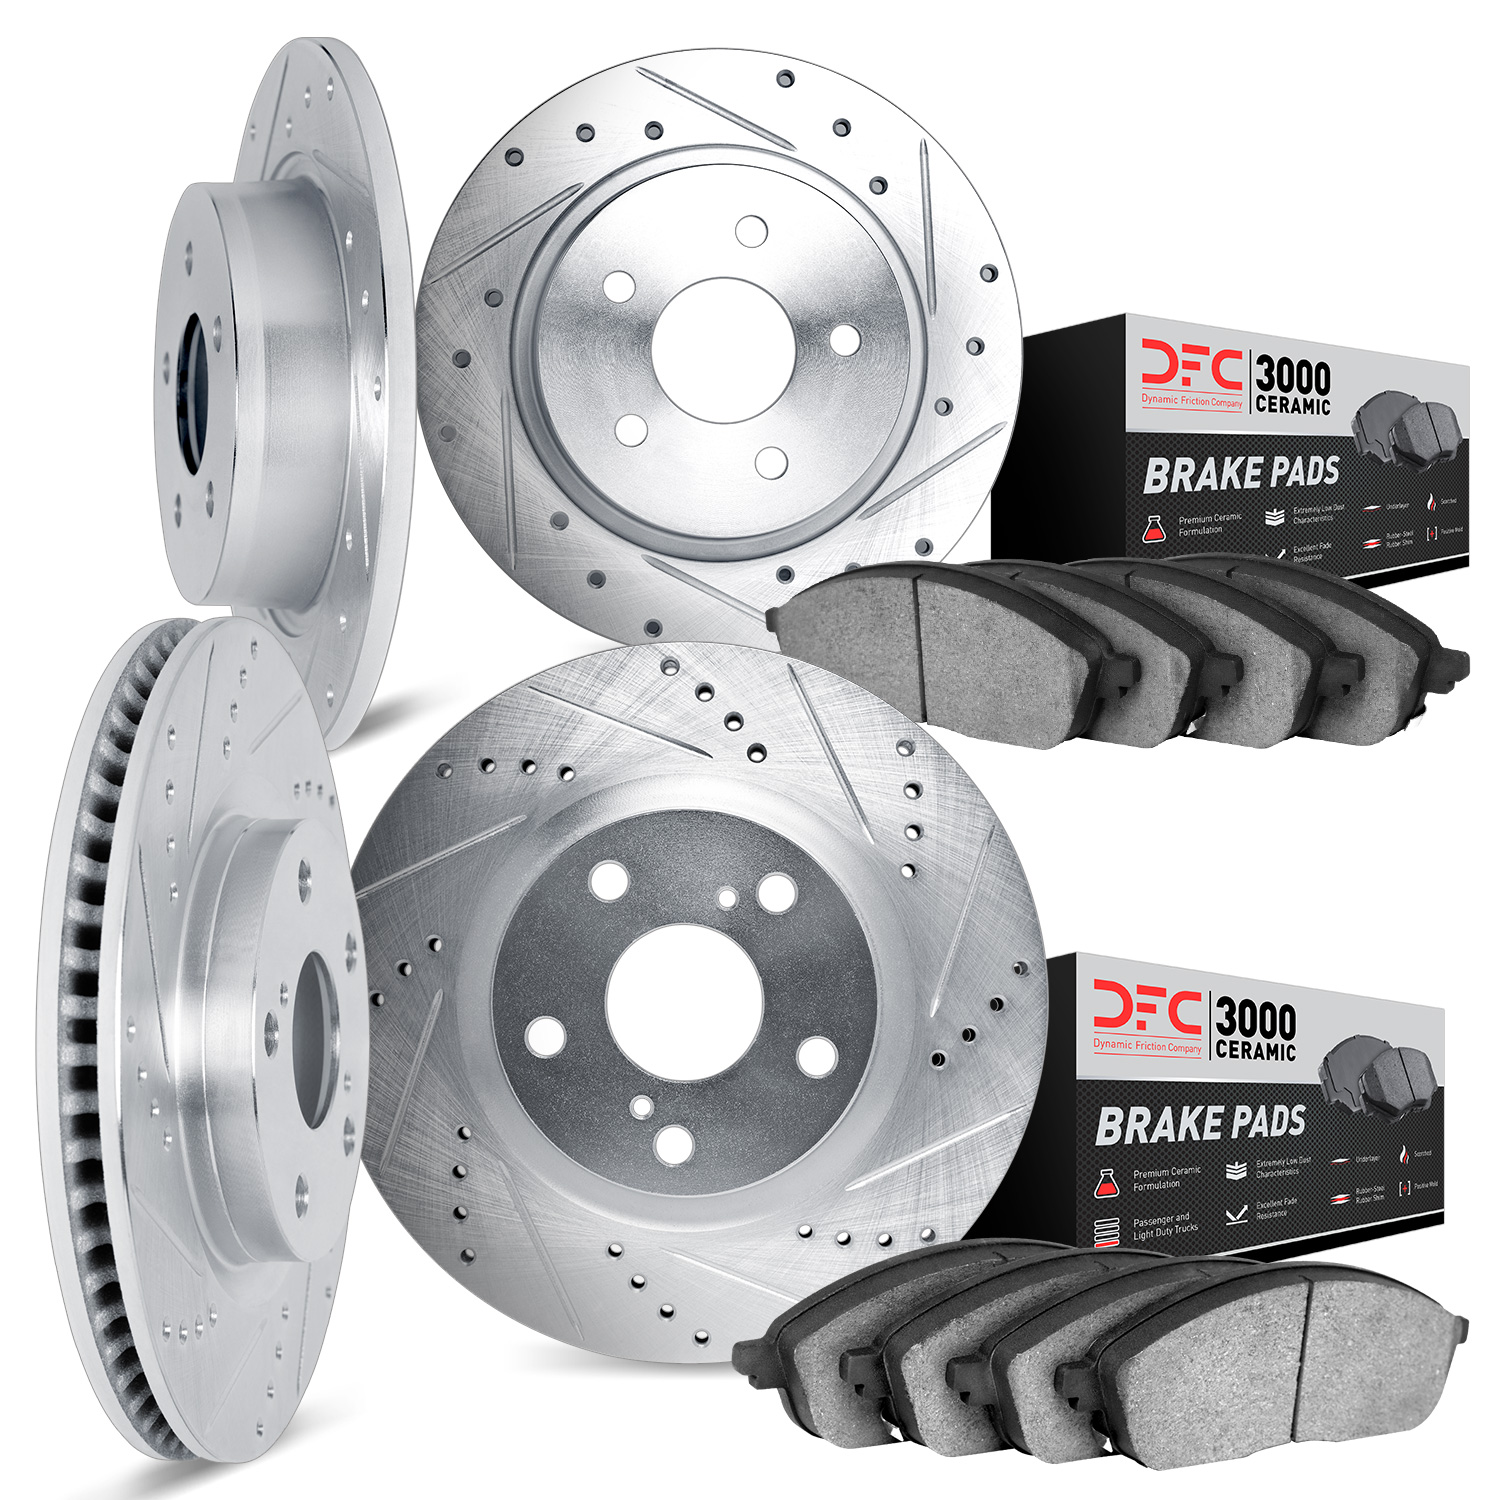 7304-54080 Drilled/Slotted Brake Rotor with 3000-Series Ceramic Brake Pads Kit [Silver], 2010-2010 Ford/Lincoln/Mercury/Mazda, P